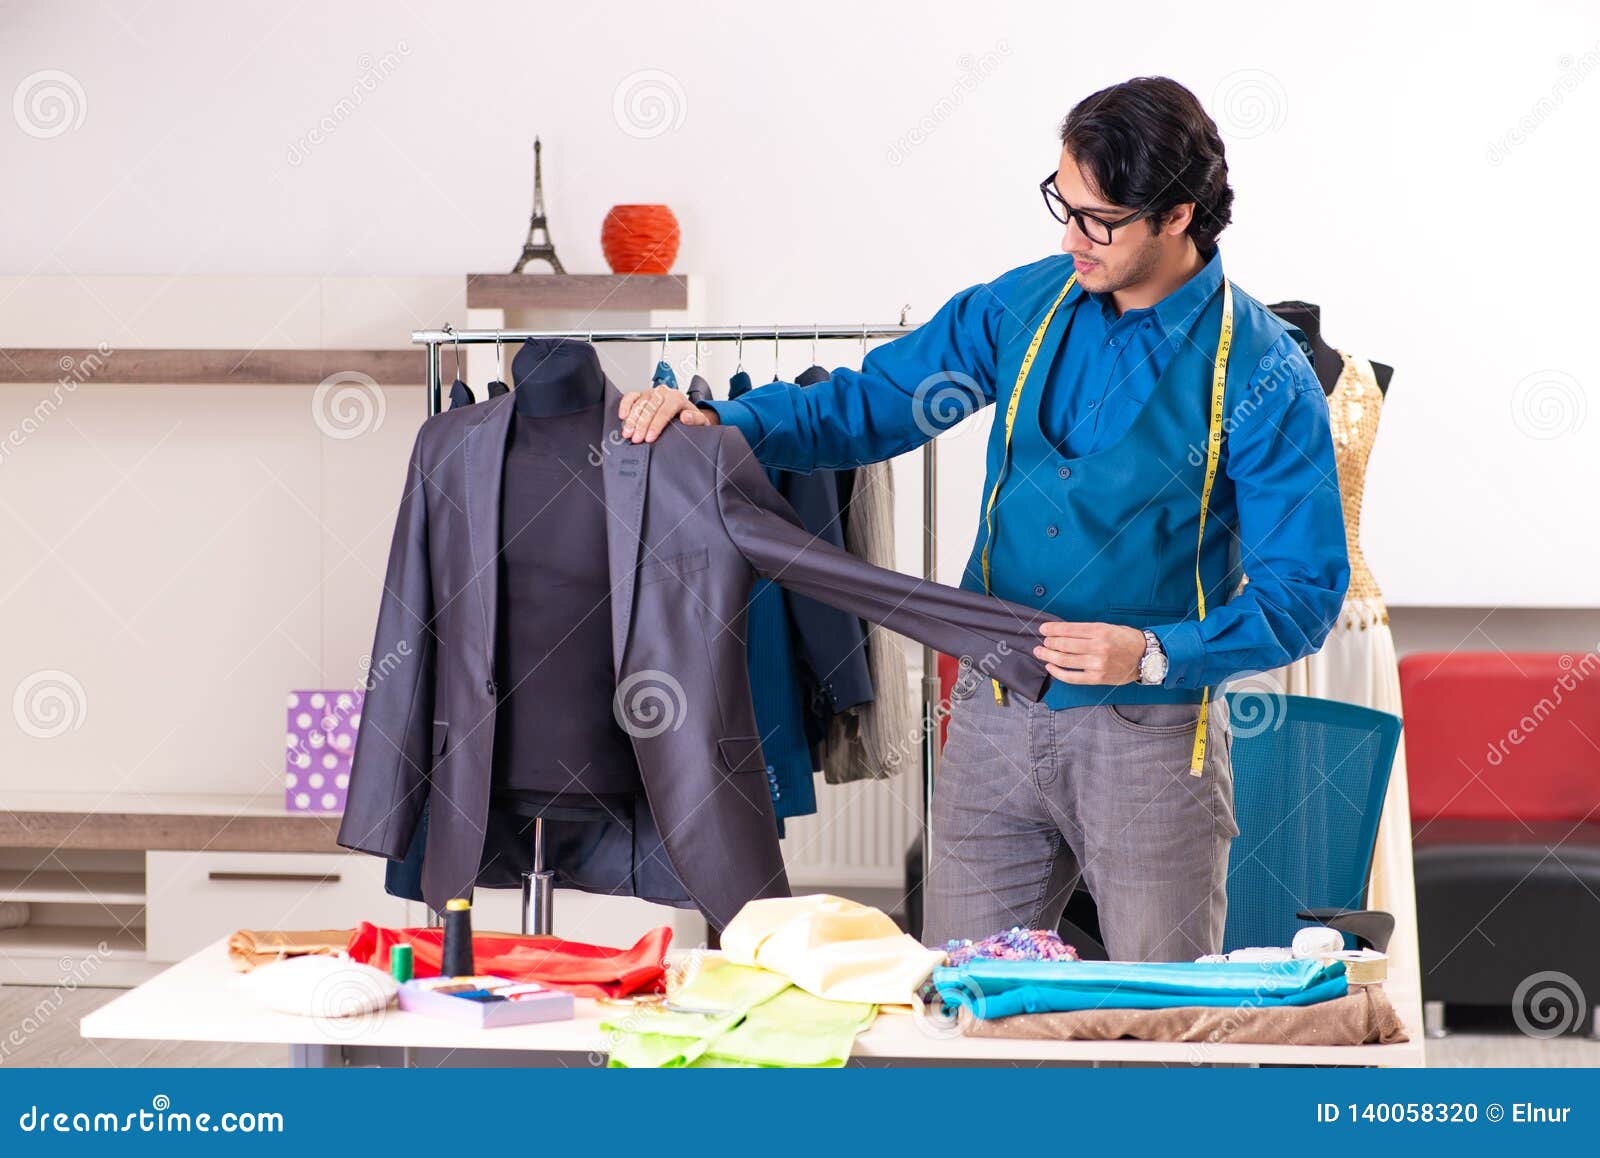 The Young Male Tailor Working at Workshop Stock Photo - Image of ...